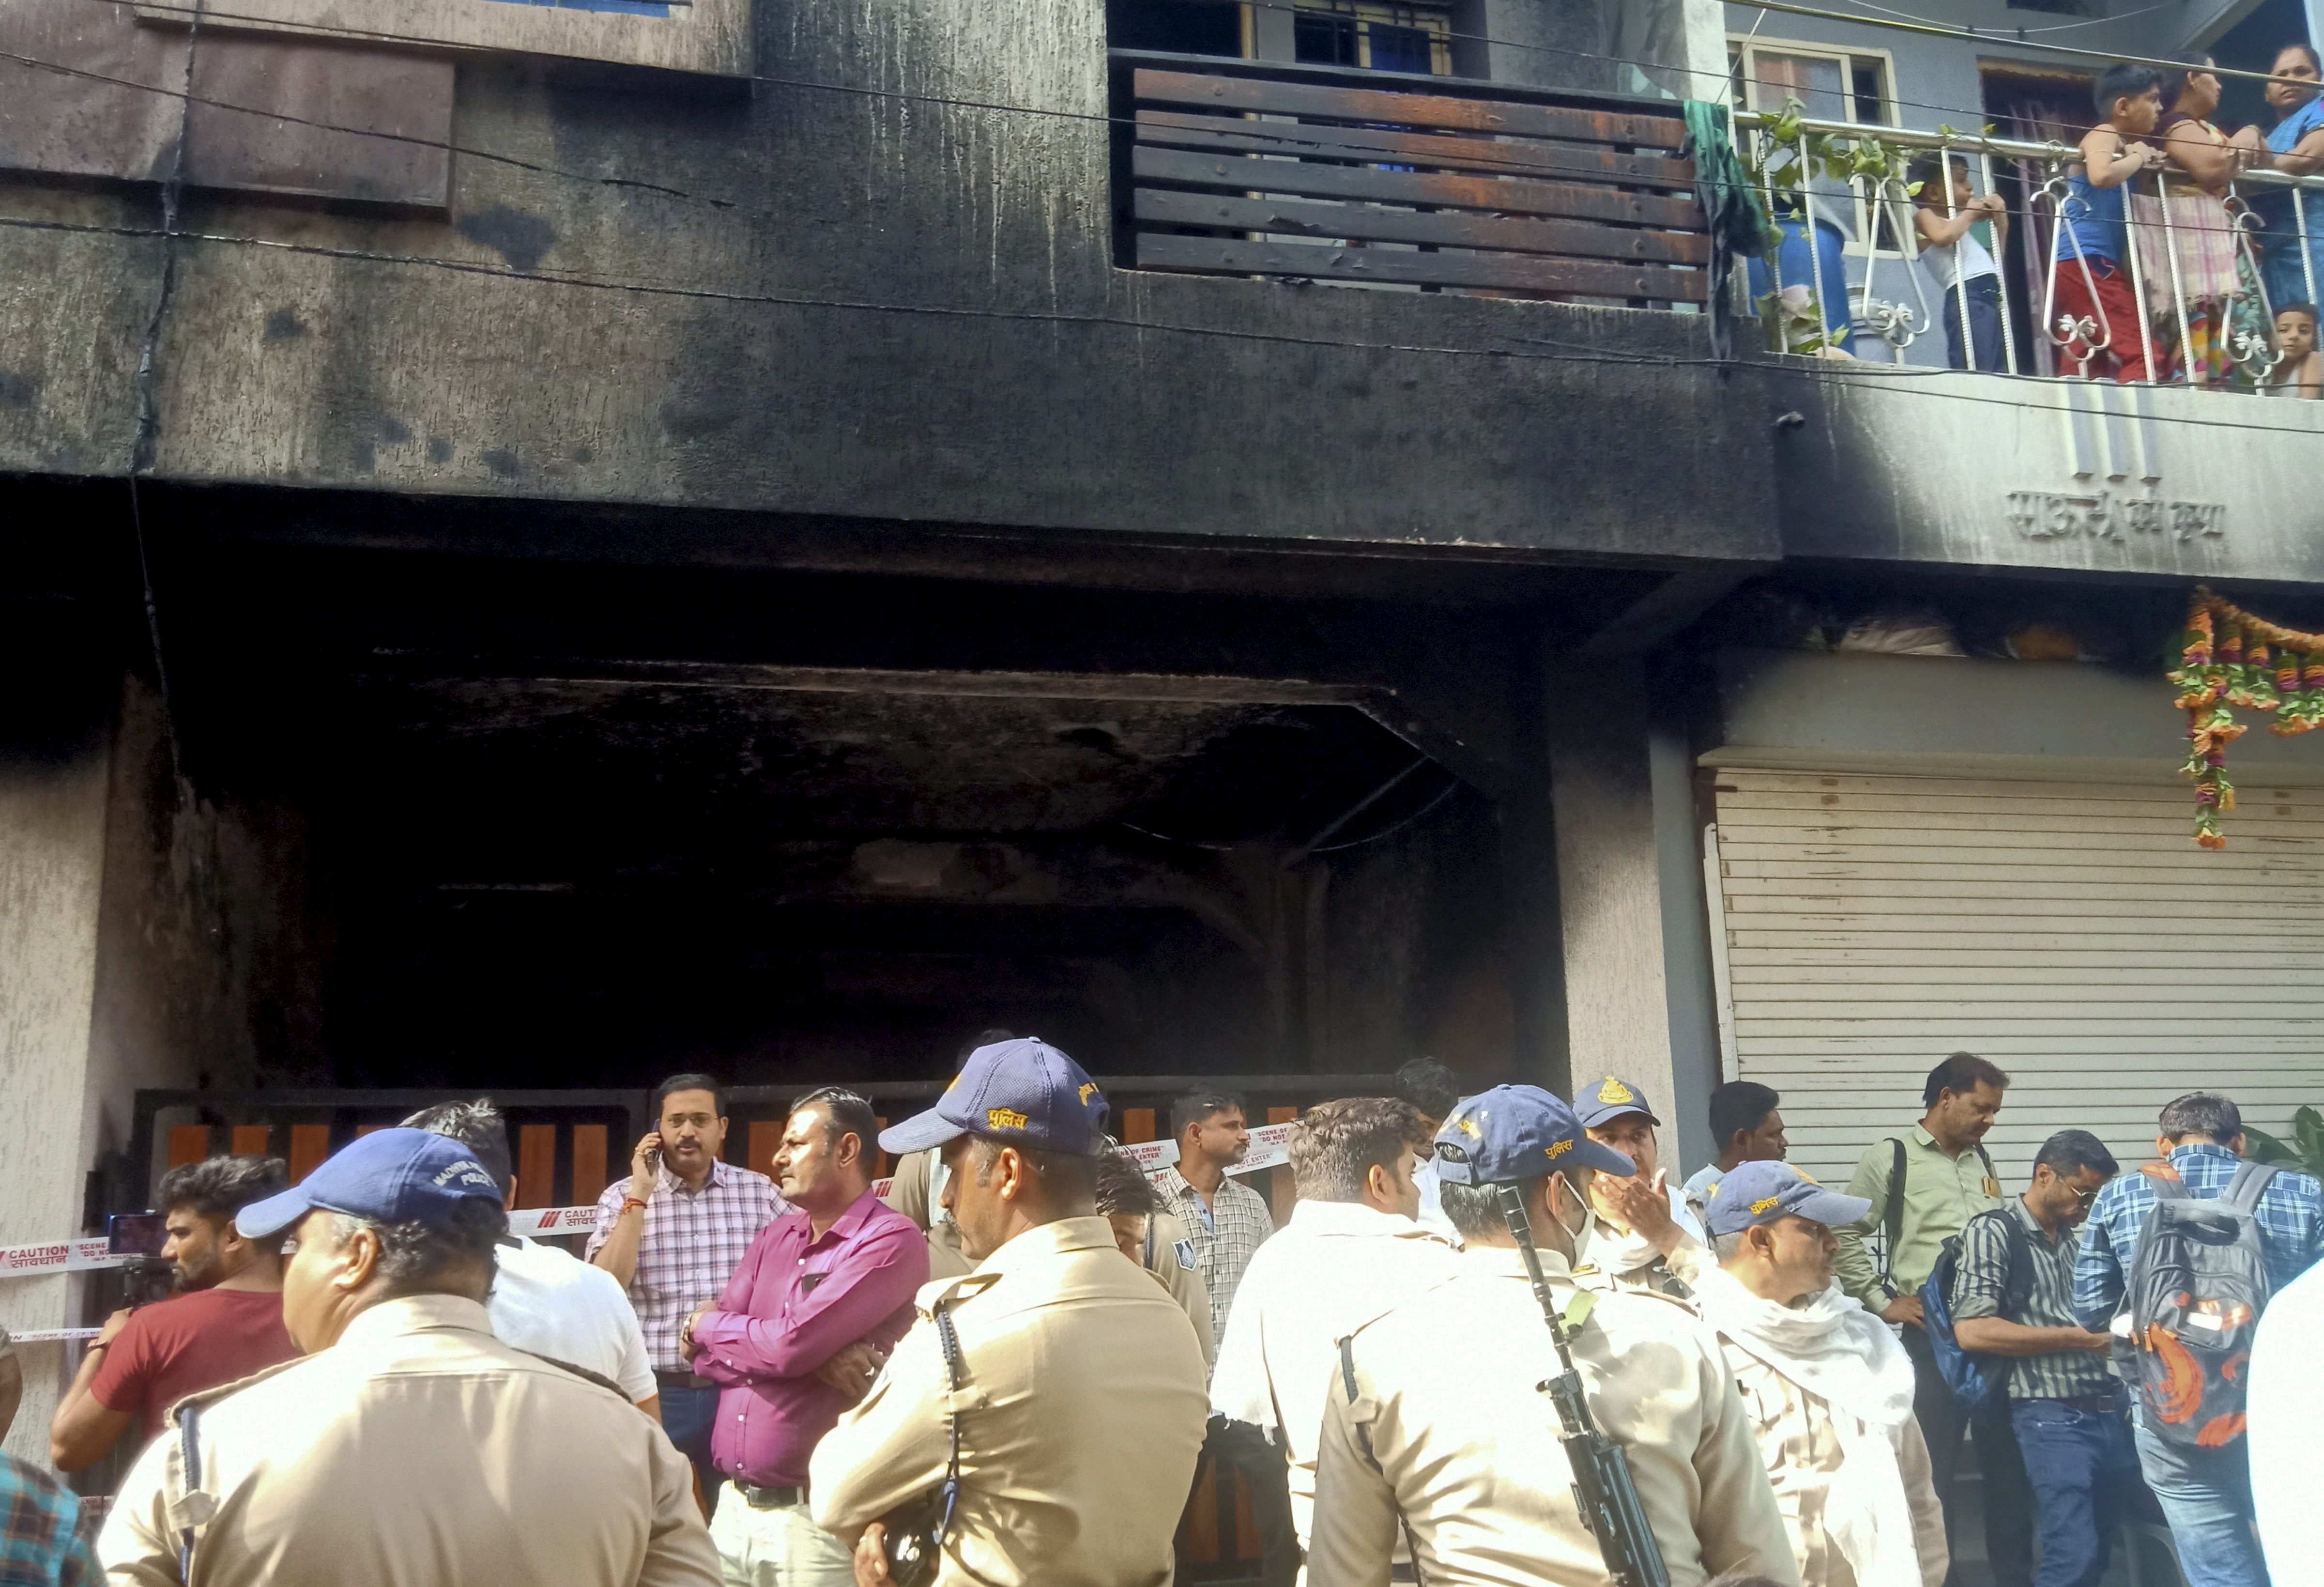 Seven dead in fire at Indore building; cops probe leads suggesting jilted lover started it by torching a vehicle